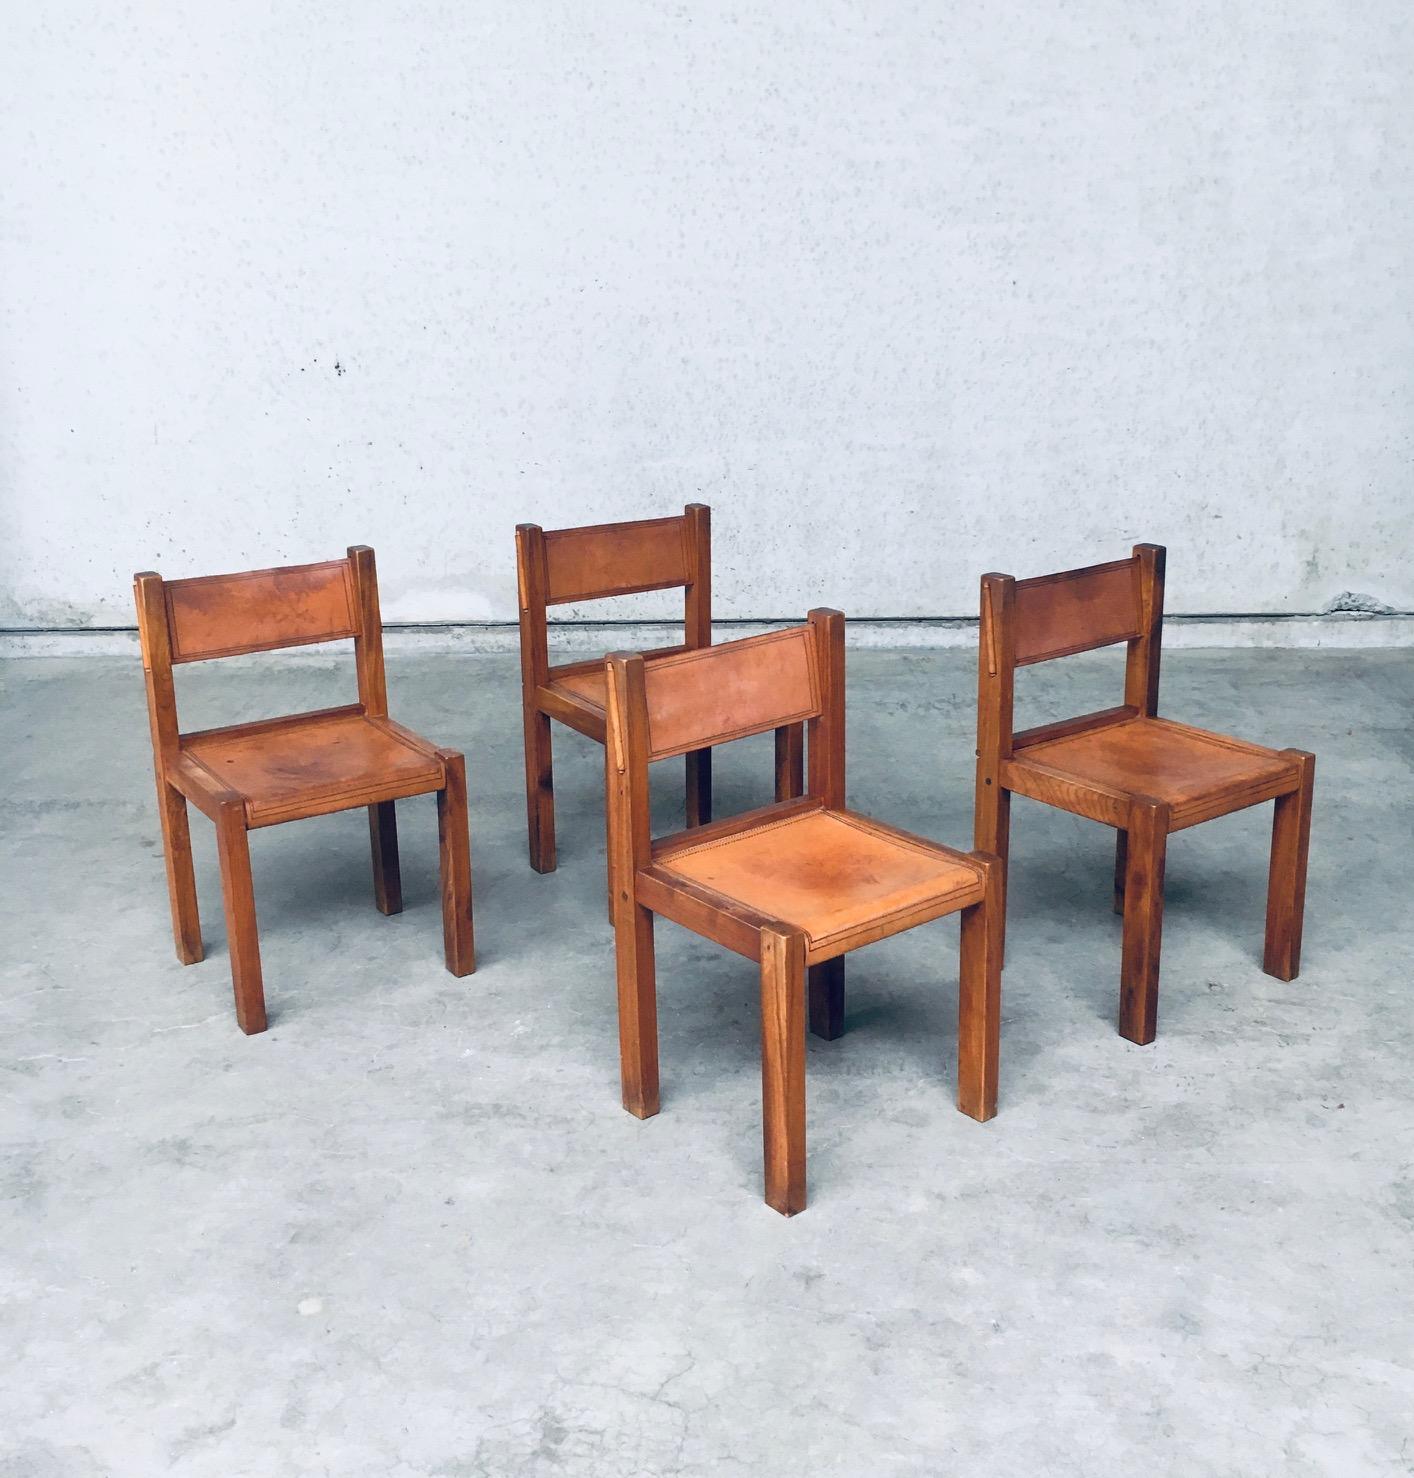 Vintage Midcentury Italian Design Elm & Cognac Leather Dining Room Chair set of 4. Designed in the style / manner of Pierre Chapo. Made in Italy, 1960's period. Impressive designed chairs with nice details on the construction. Elm wood frame with